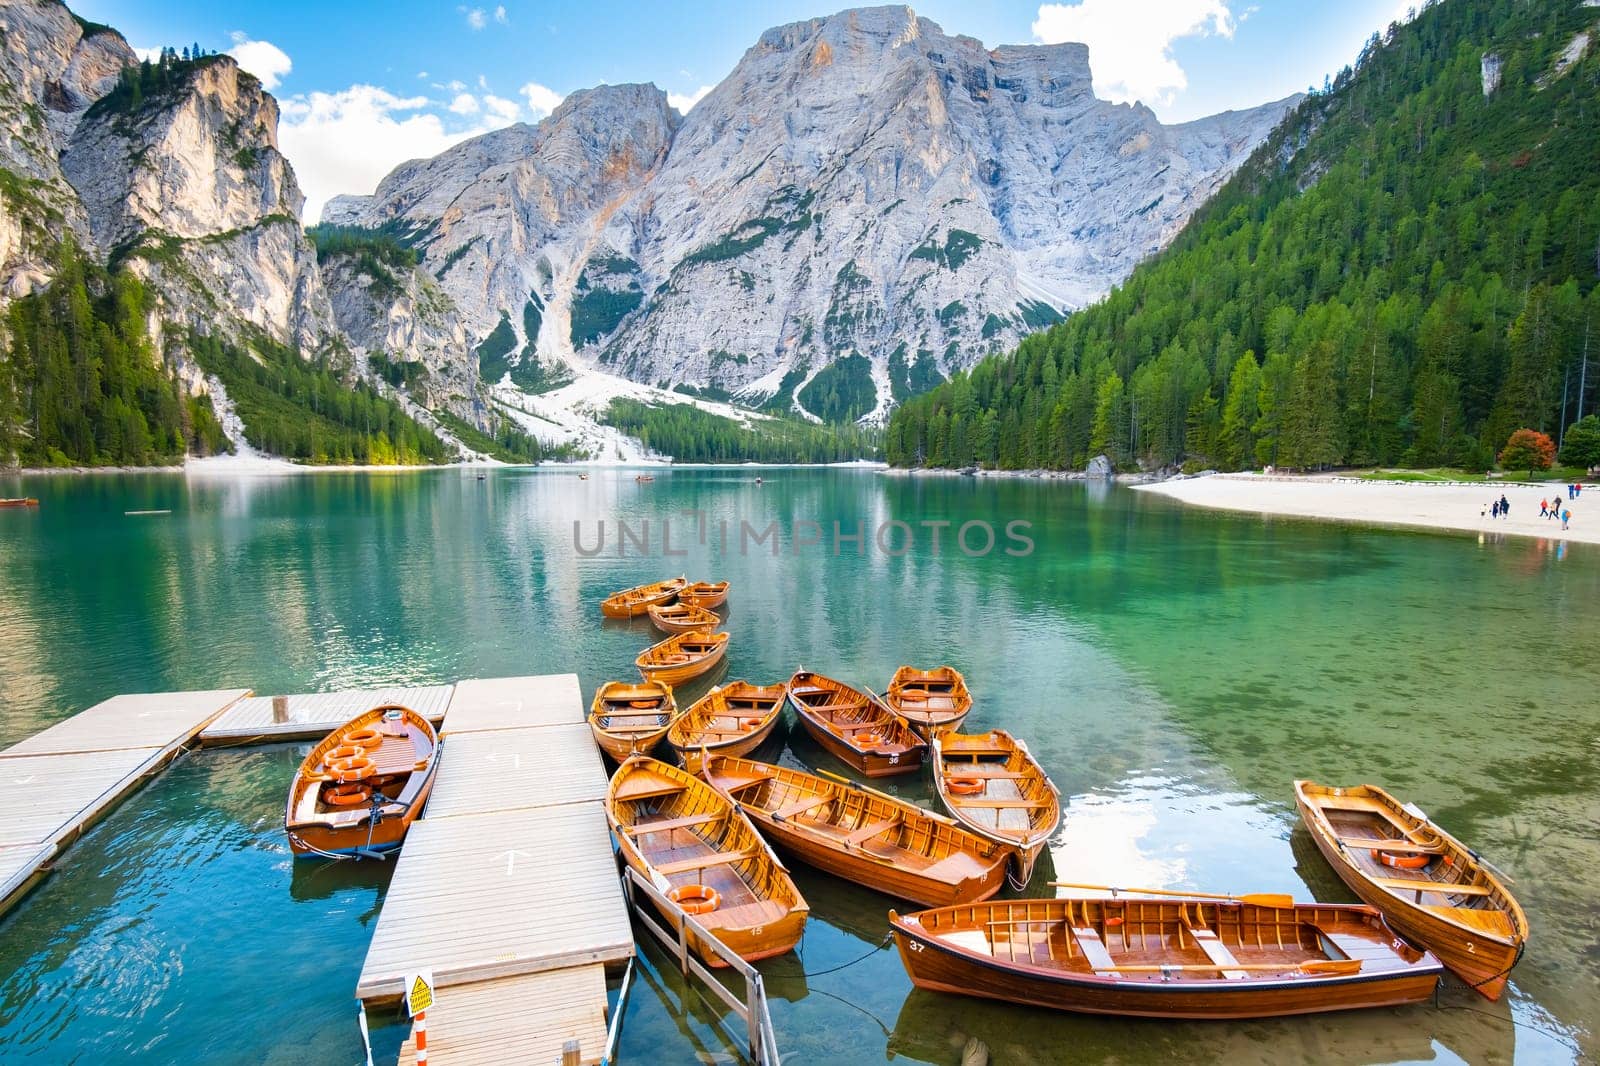 Boats on the Lake Braies in Dolomites mountains, Italy. Picturesque Italian landscape.